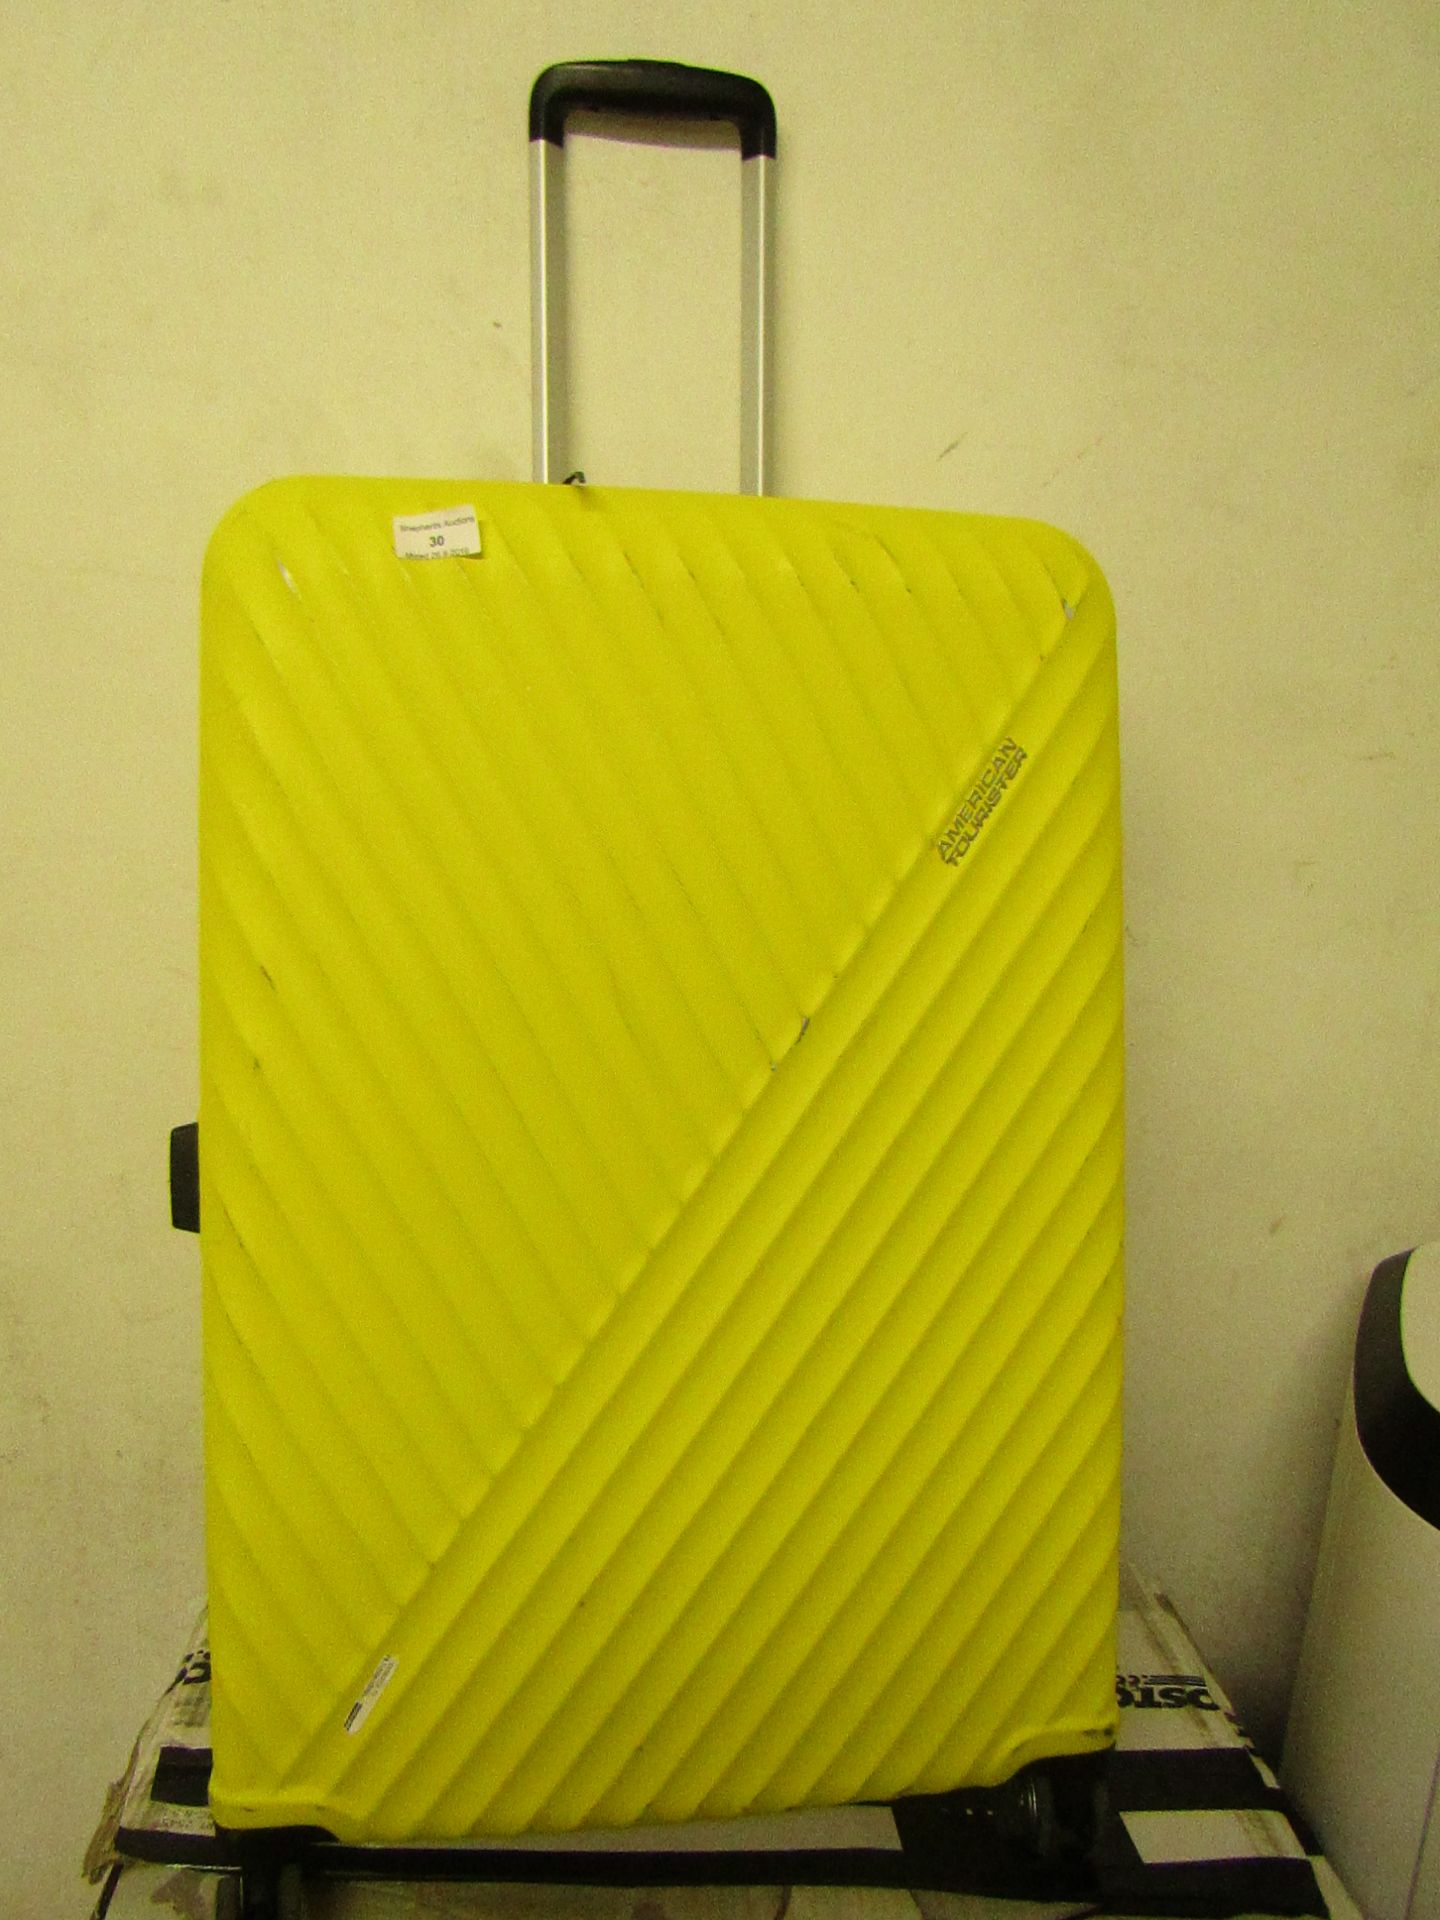 American Tourister large suitcase, wheel has fallen off.